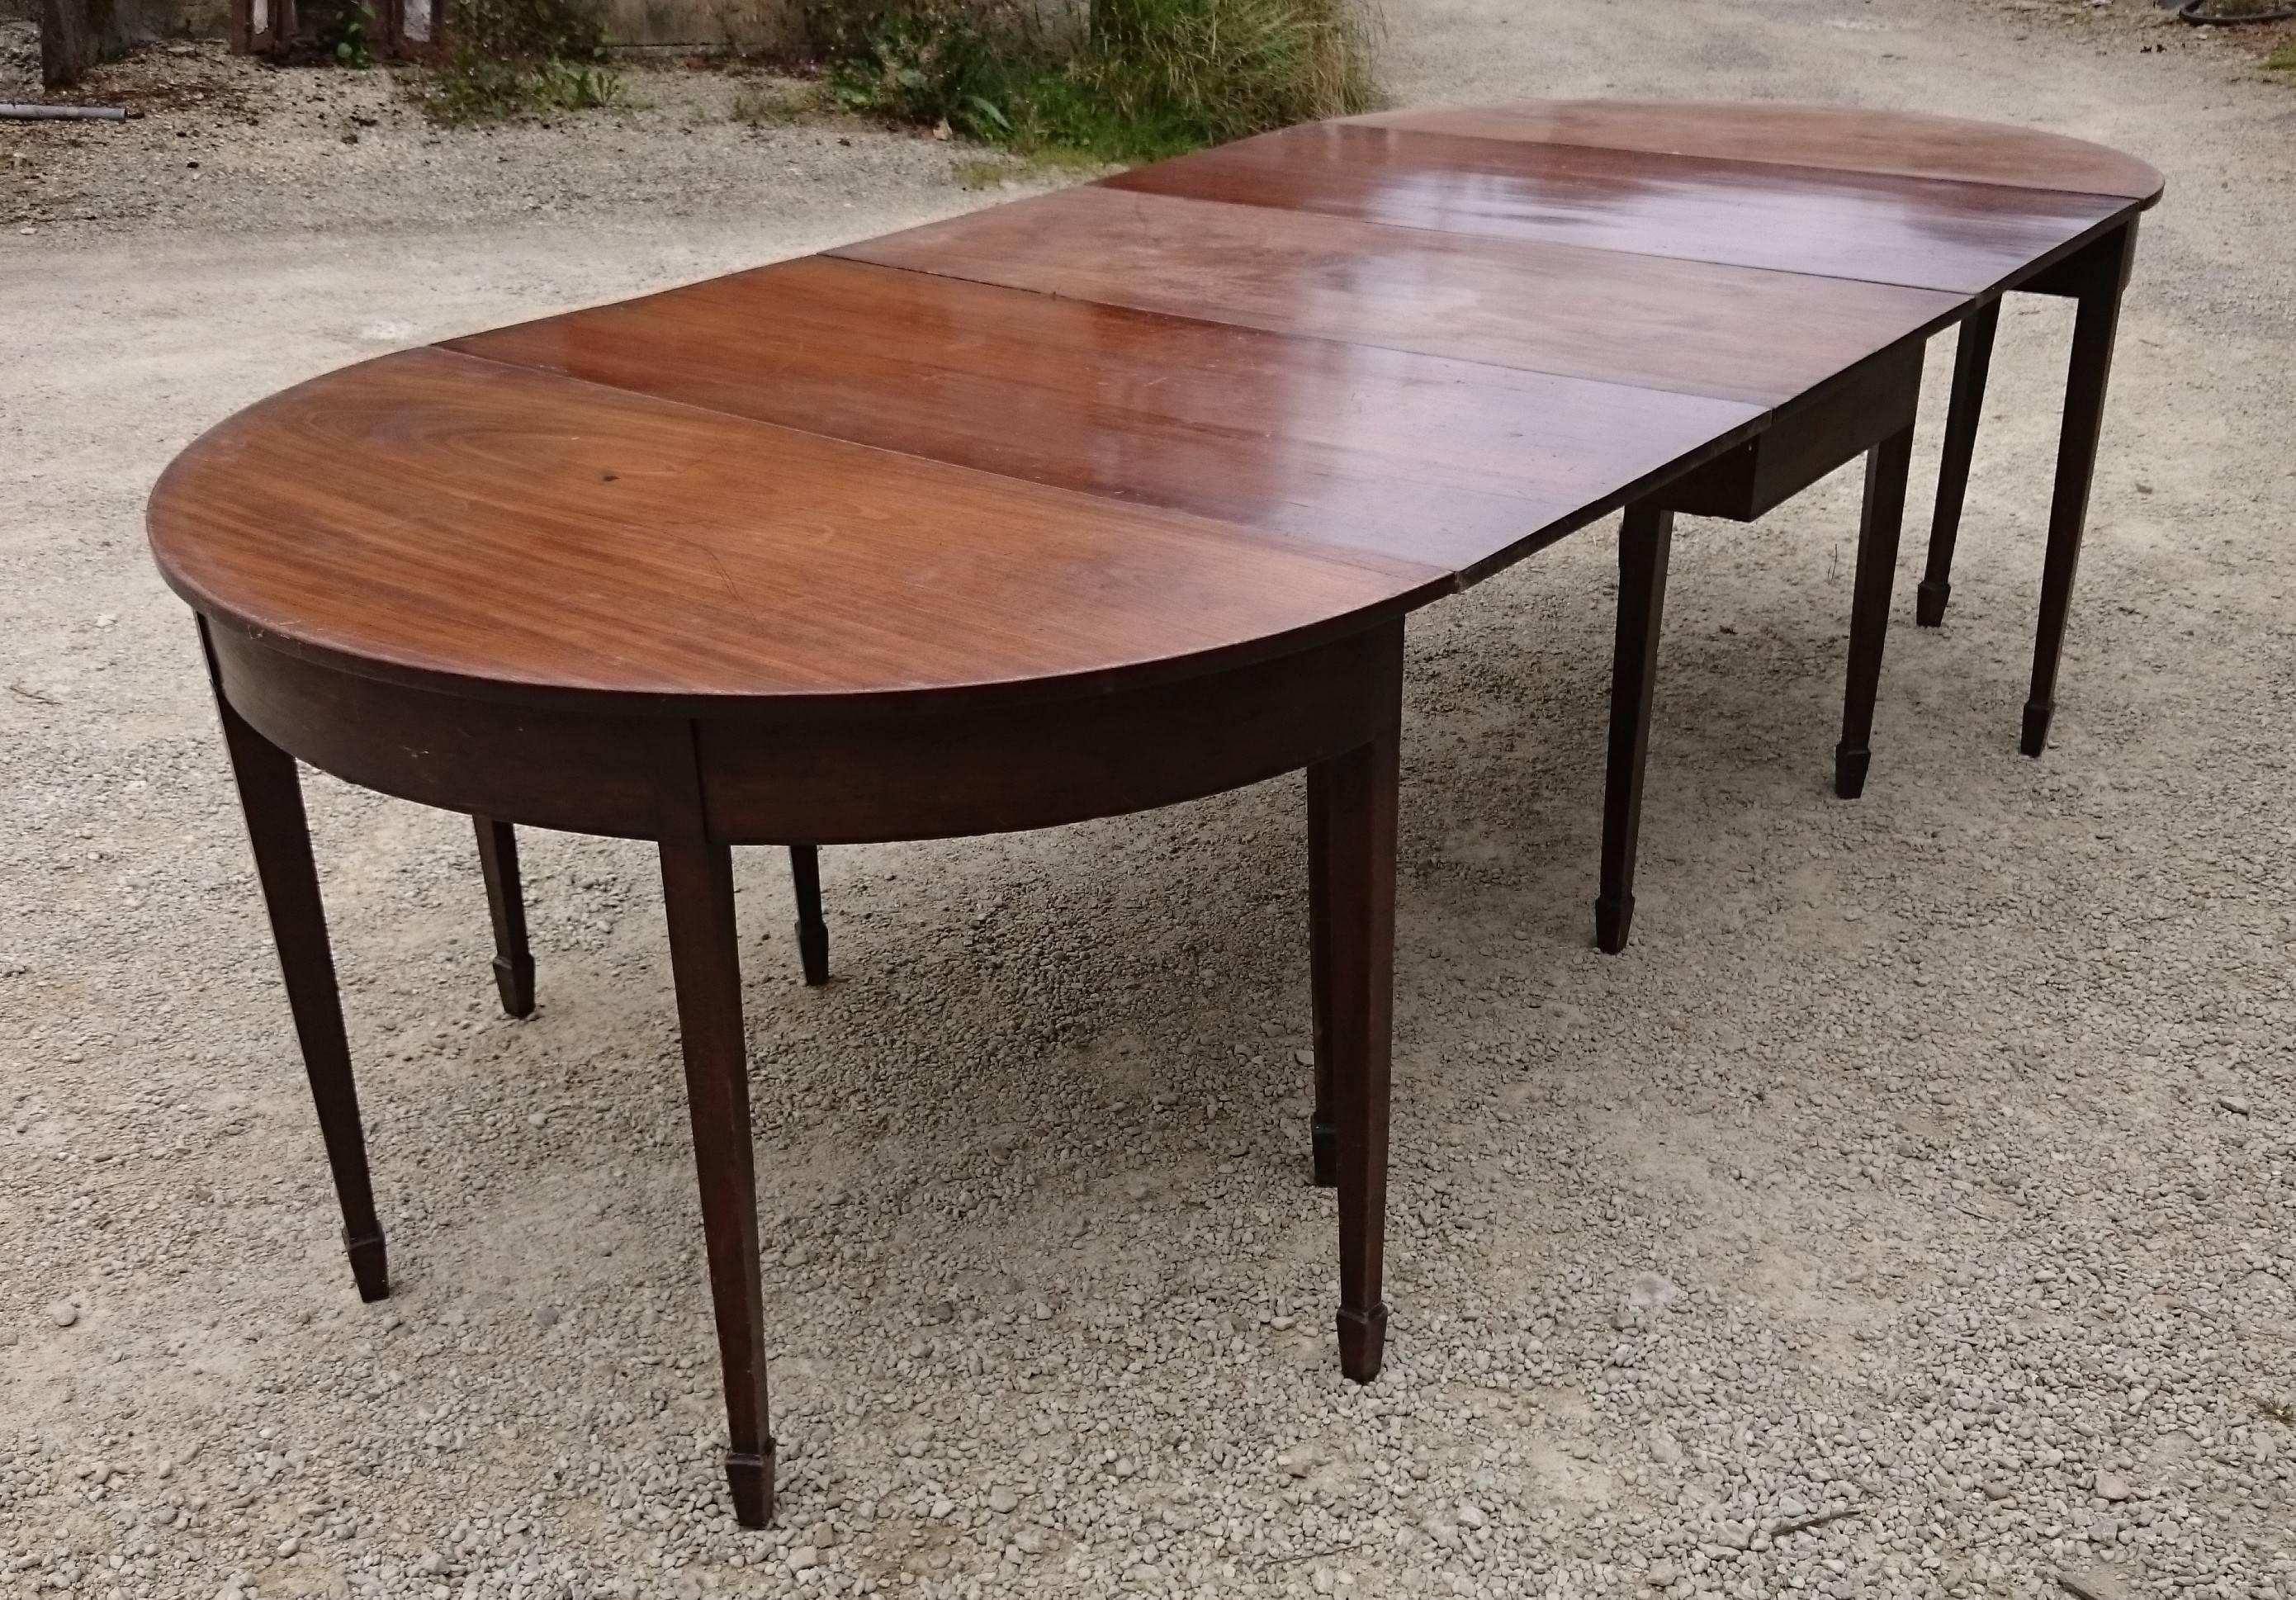 Good original and versatile antique d end dining table. This table is made of excellent fine figured mahogany with good mechanism which means that the legs are tucked out of the away under the table. It is also a little higher than tables usually